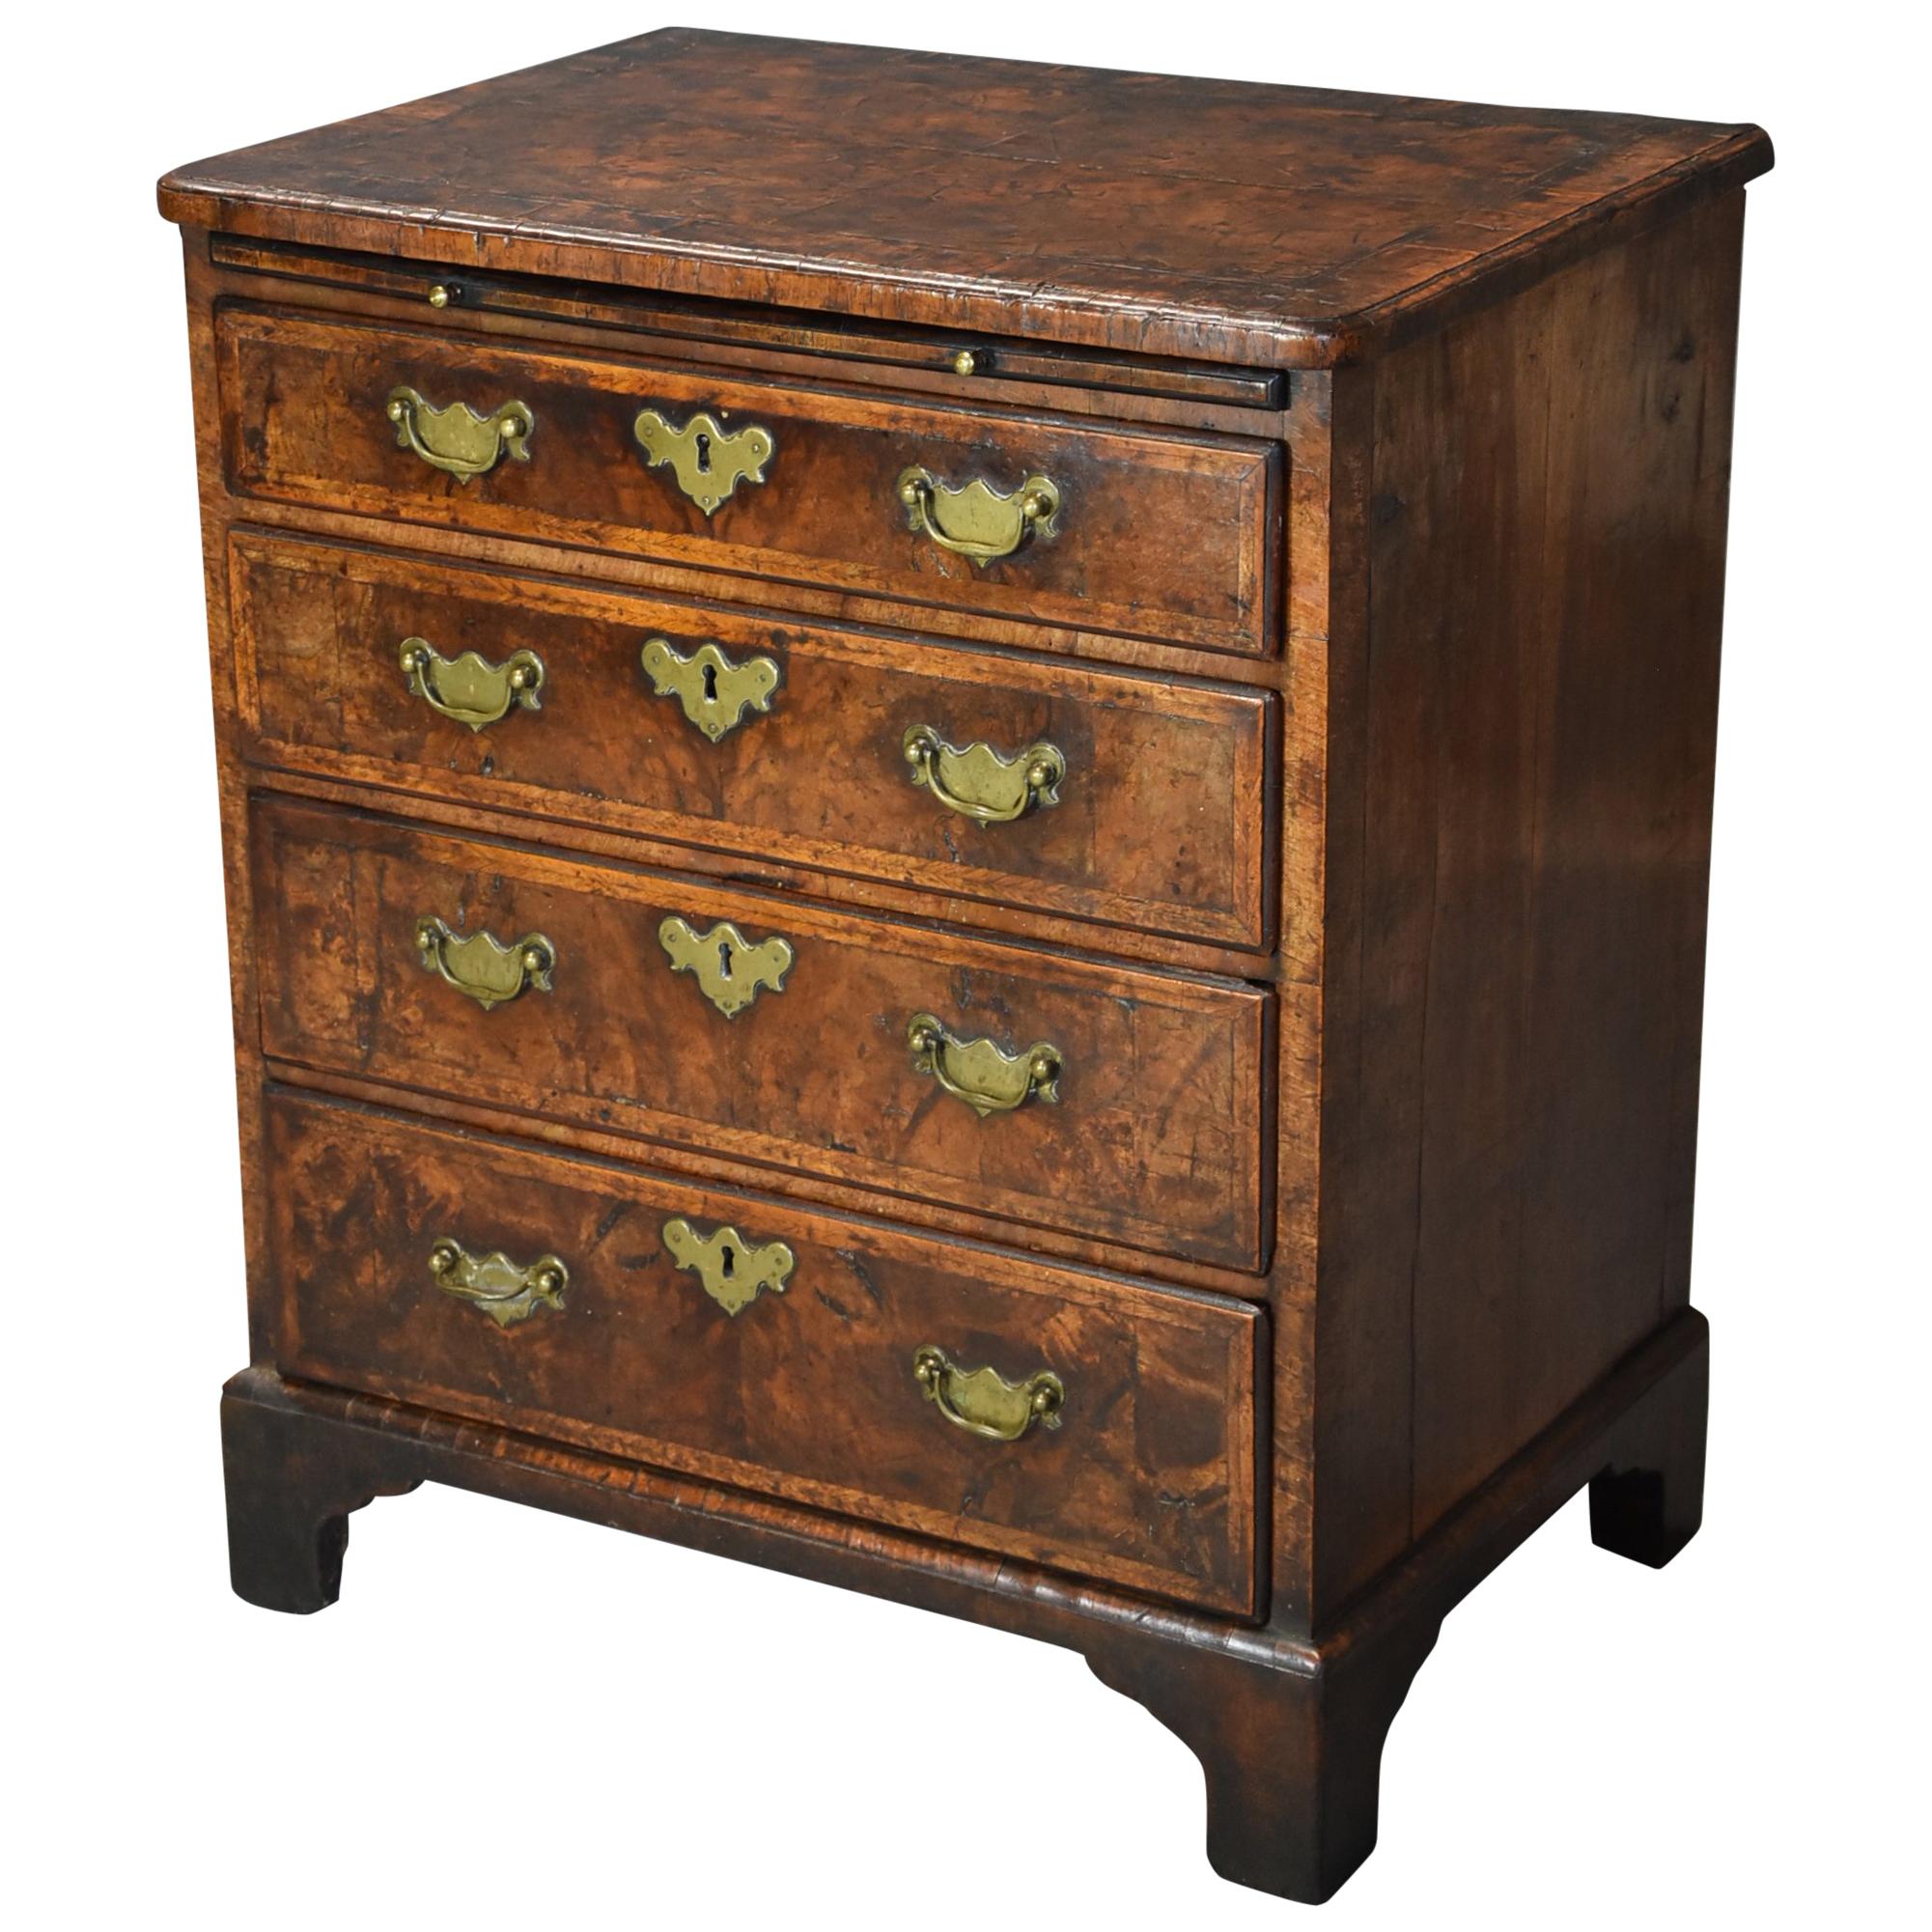 Extremely Rare Early 18th Century Walnut Chest of Drawers in Untouched Condition For Sale